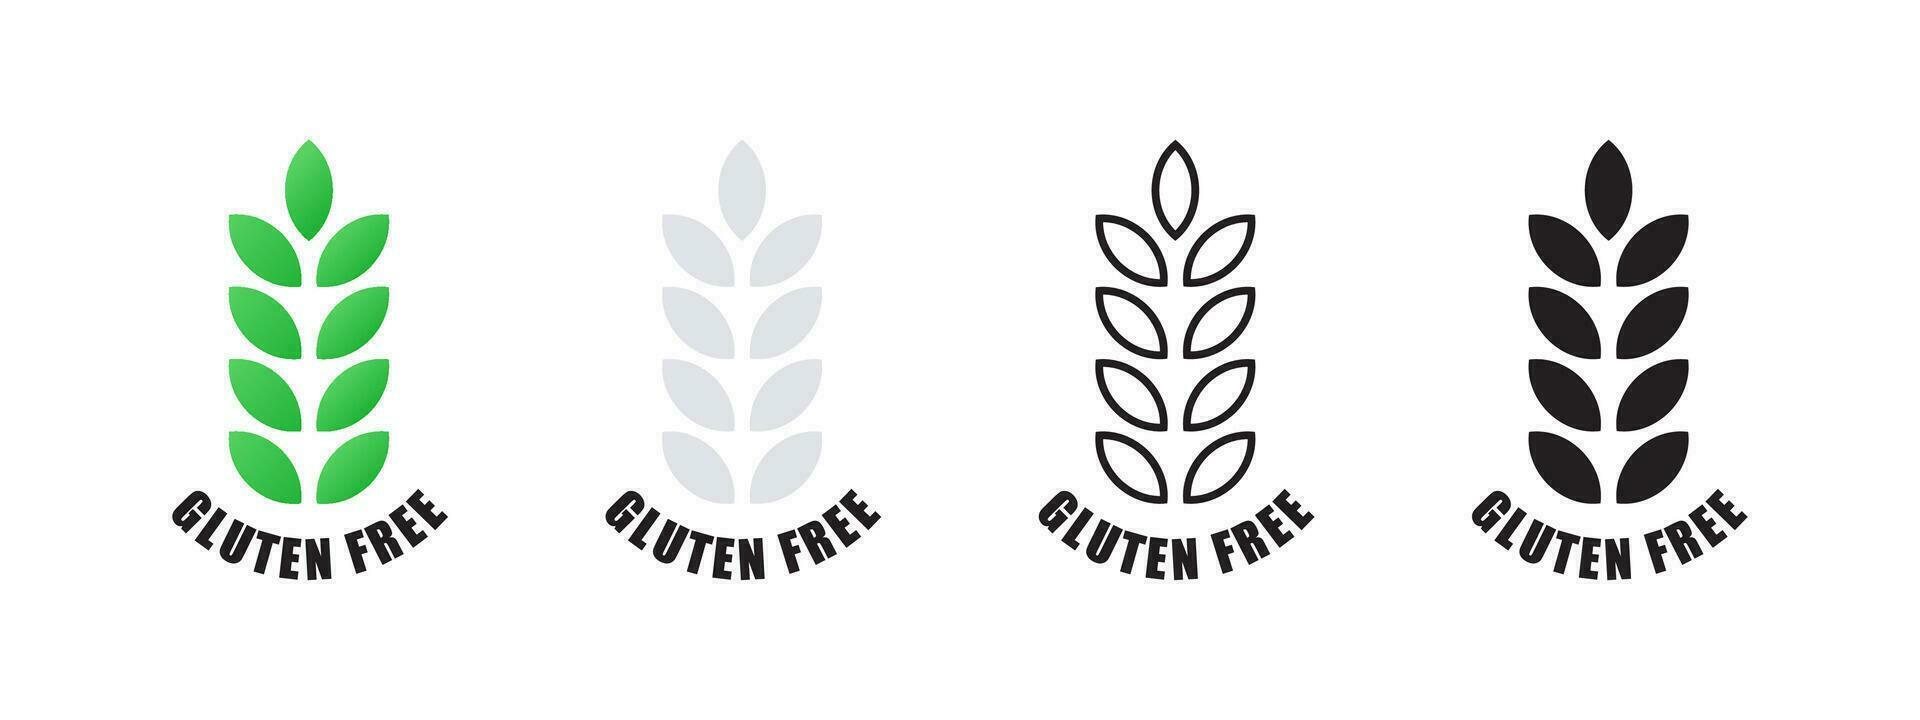 Gluten free. Product that does not contain gluten. Natural and organic foods. Vector scalable graphics